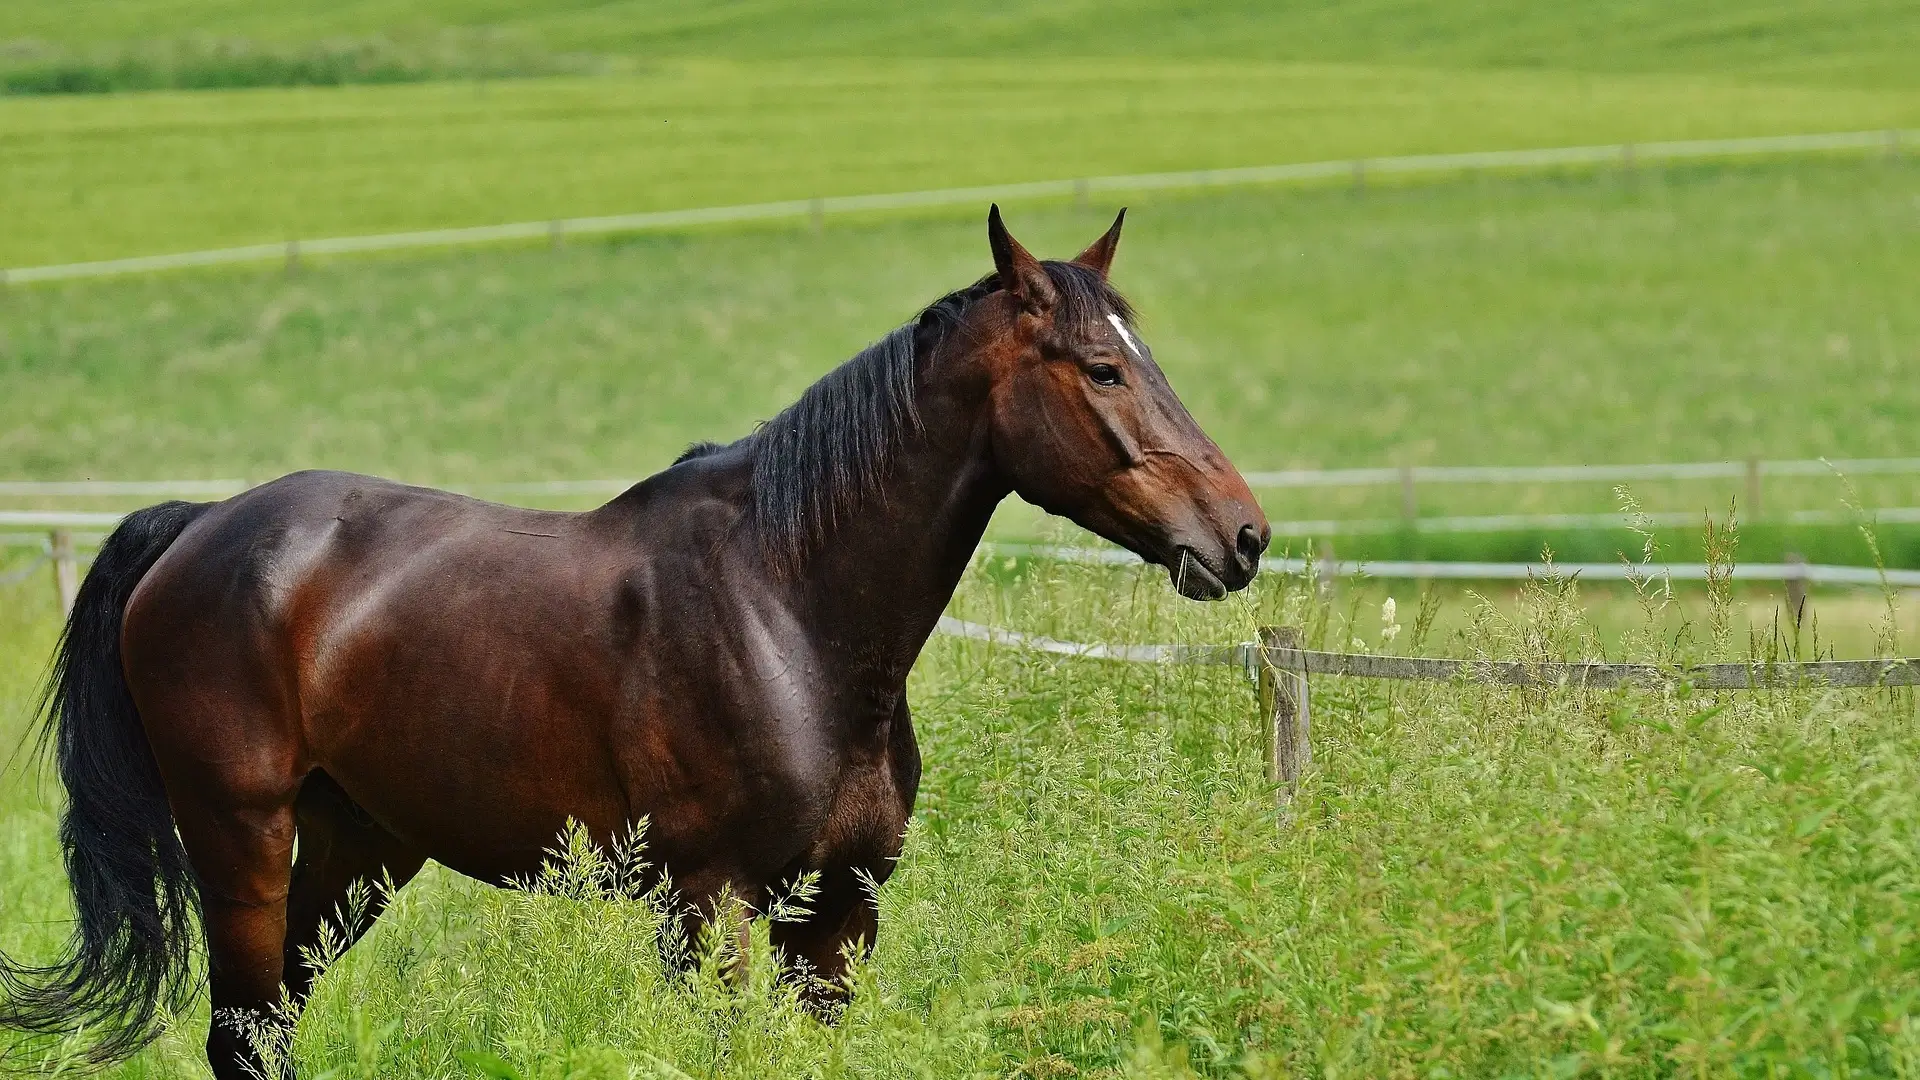 Keep horses on a small agreage horse farm with these tips (1)